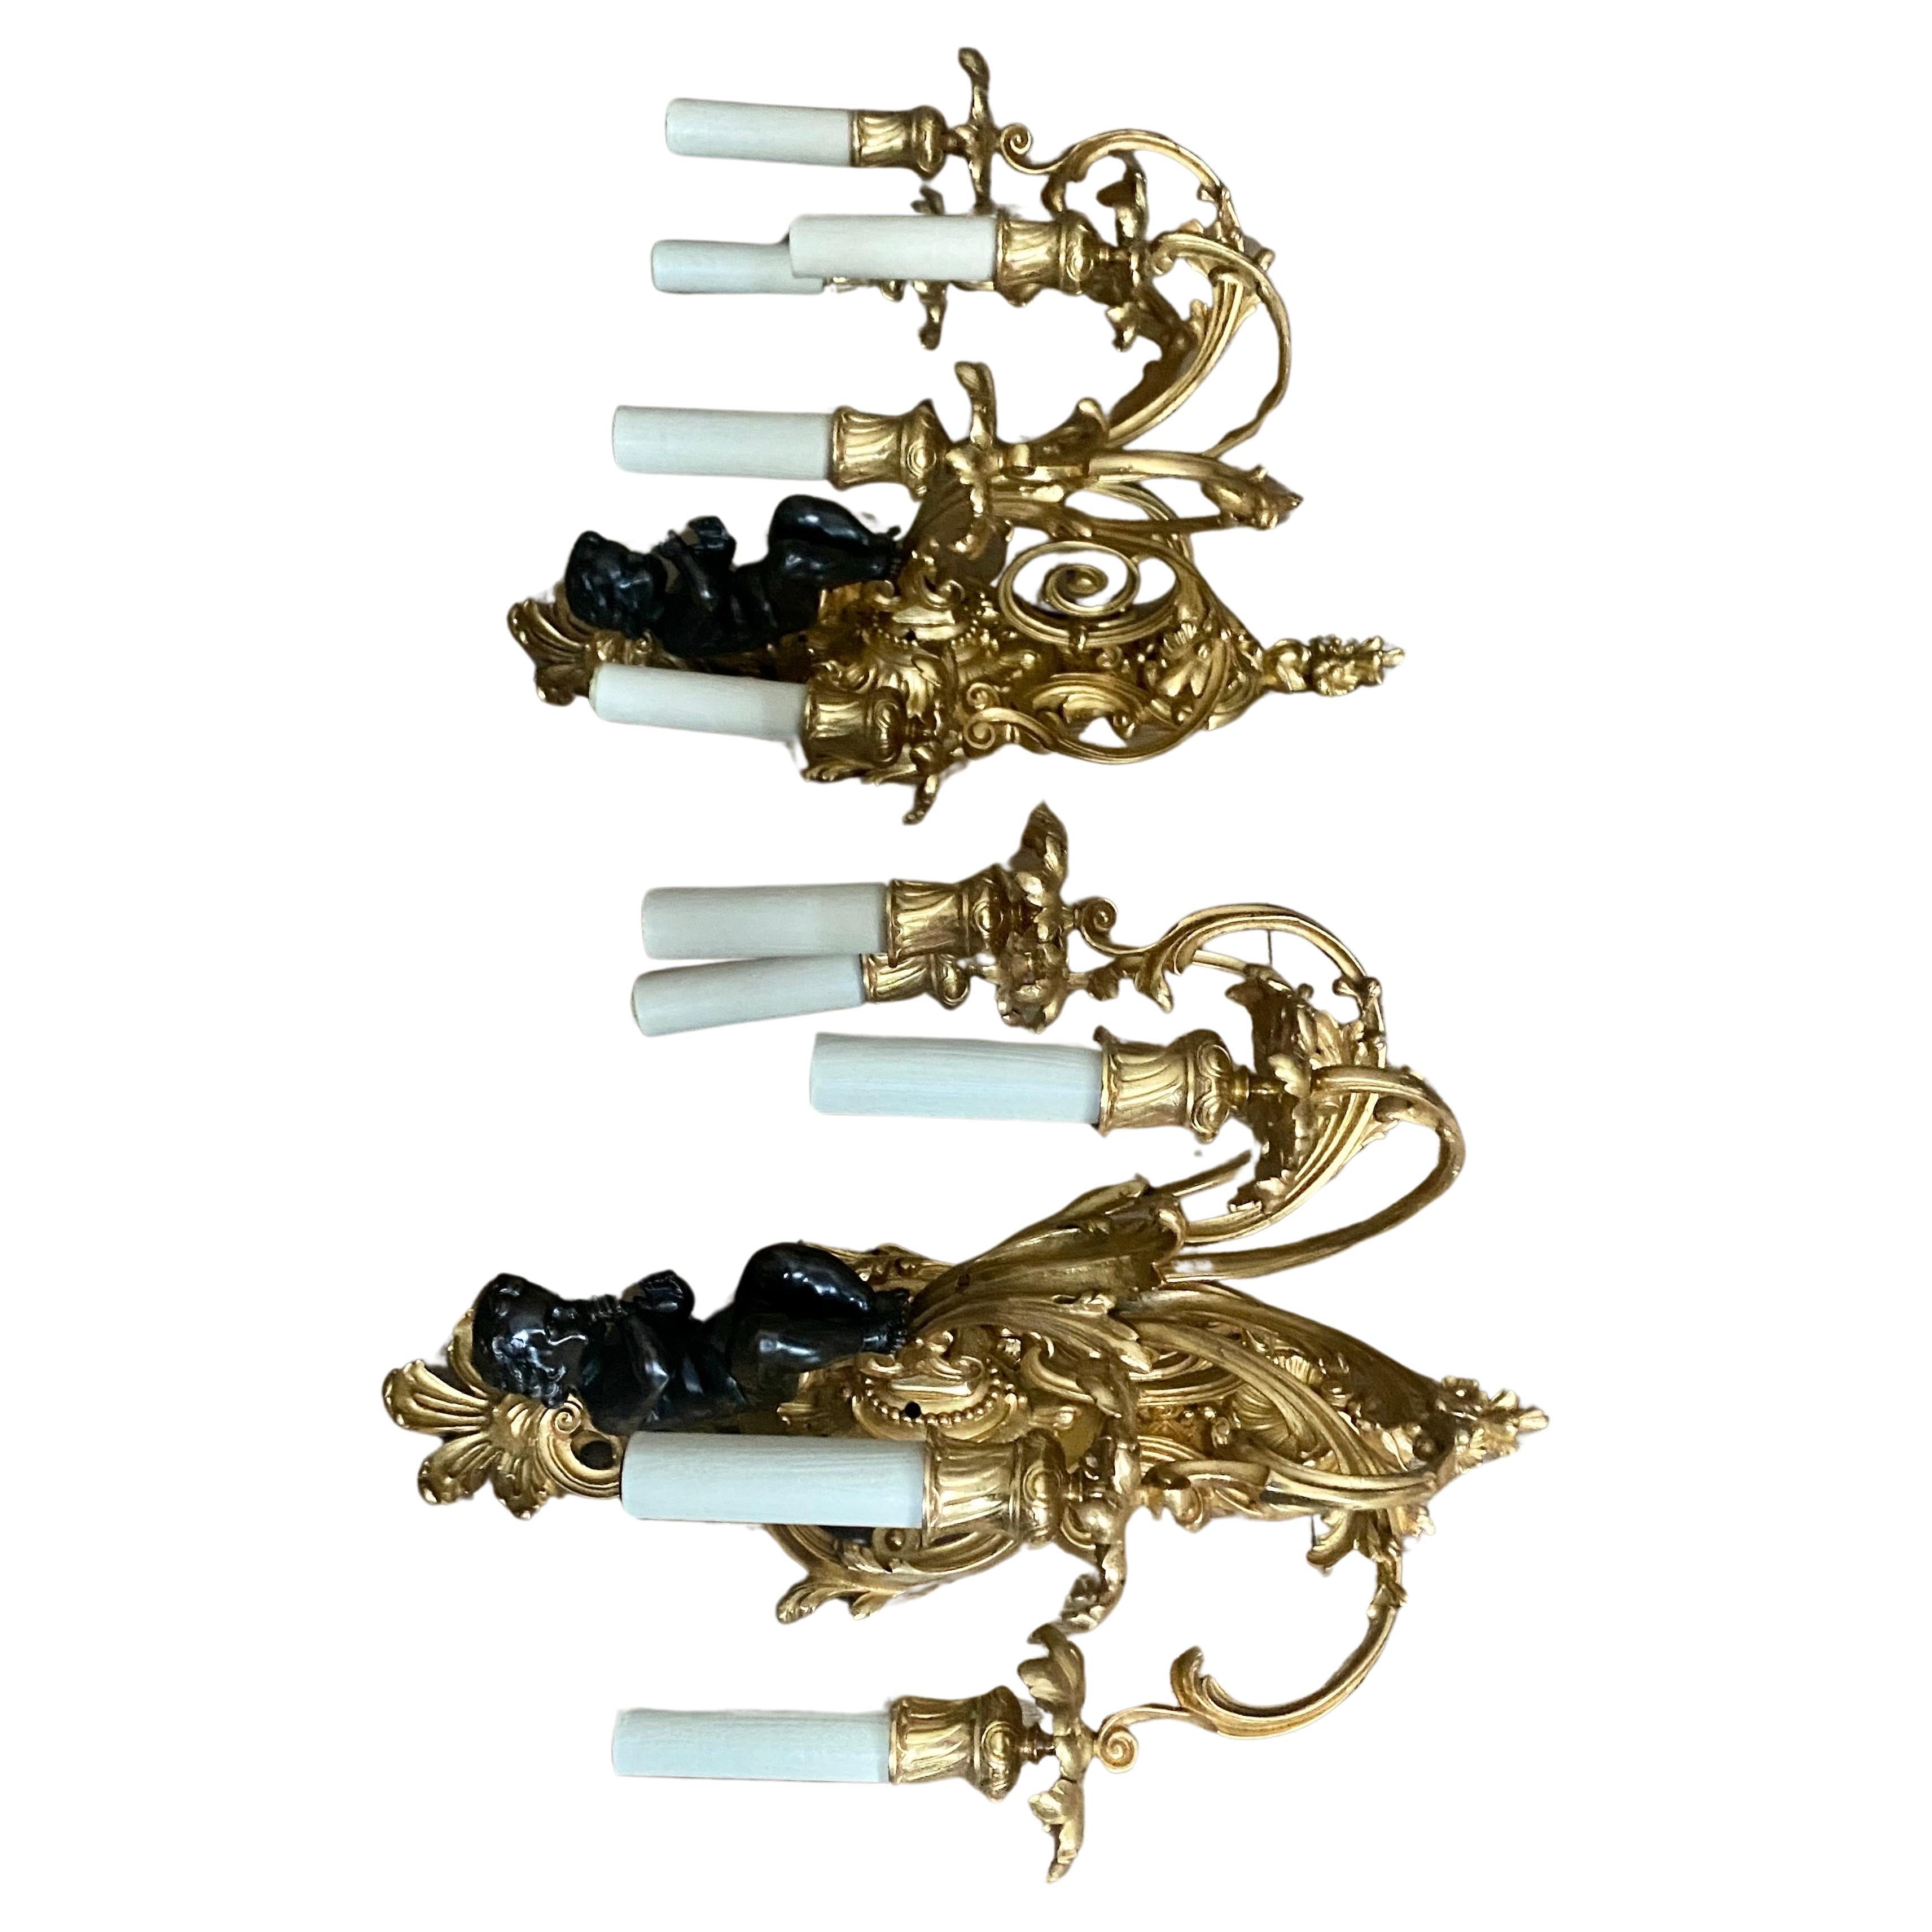 A Large Pair of 19th Century French Gilt Bronze Dore Cherub Wall Sconces For Sale 9